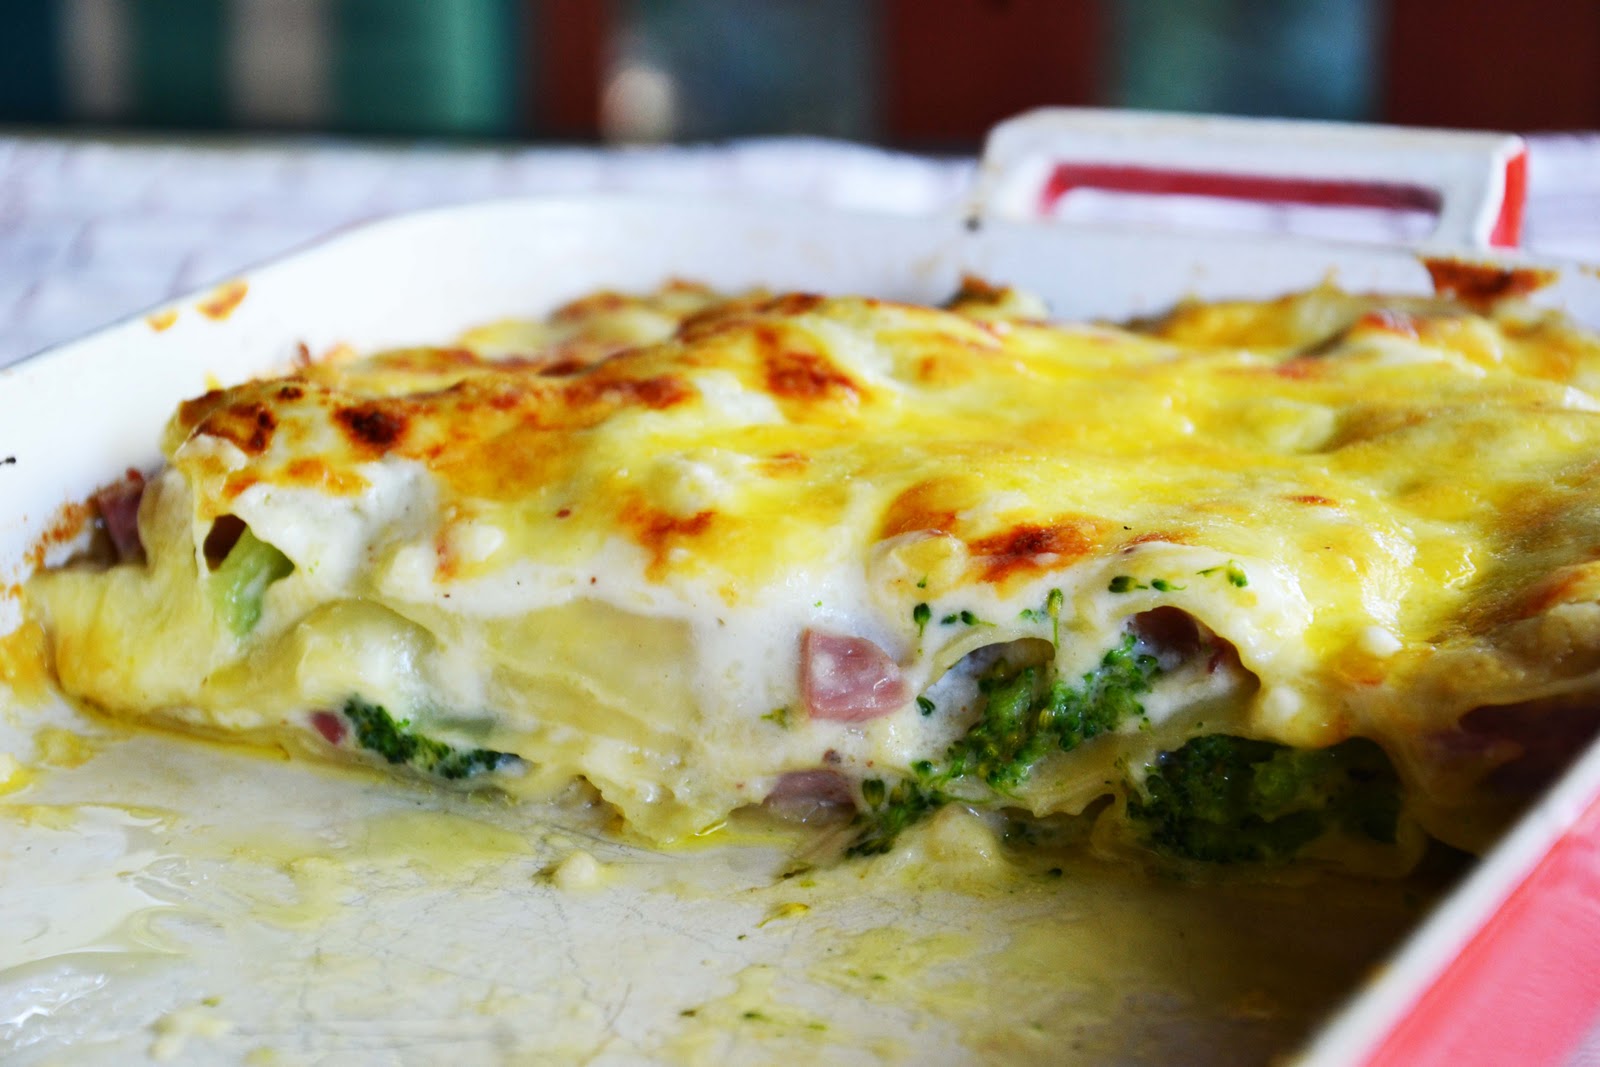 The eccentric Cook: Broccoli Lasagna and Thoughts on Veganism